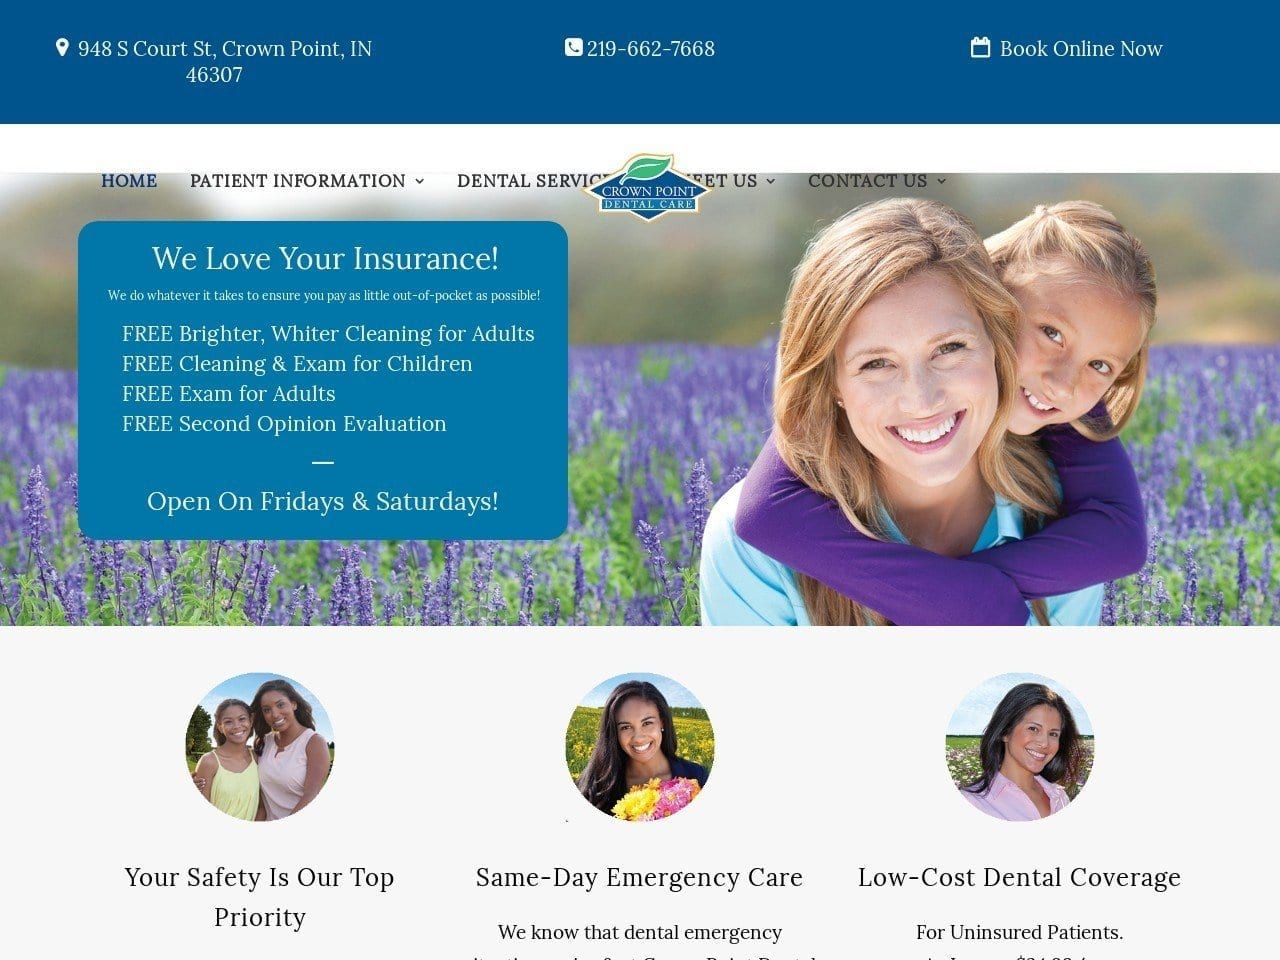 Crown Point Dental Care Levitan Rory S DDS Website Screenshot from crownpointdentalcare.com